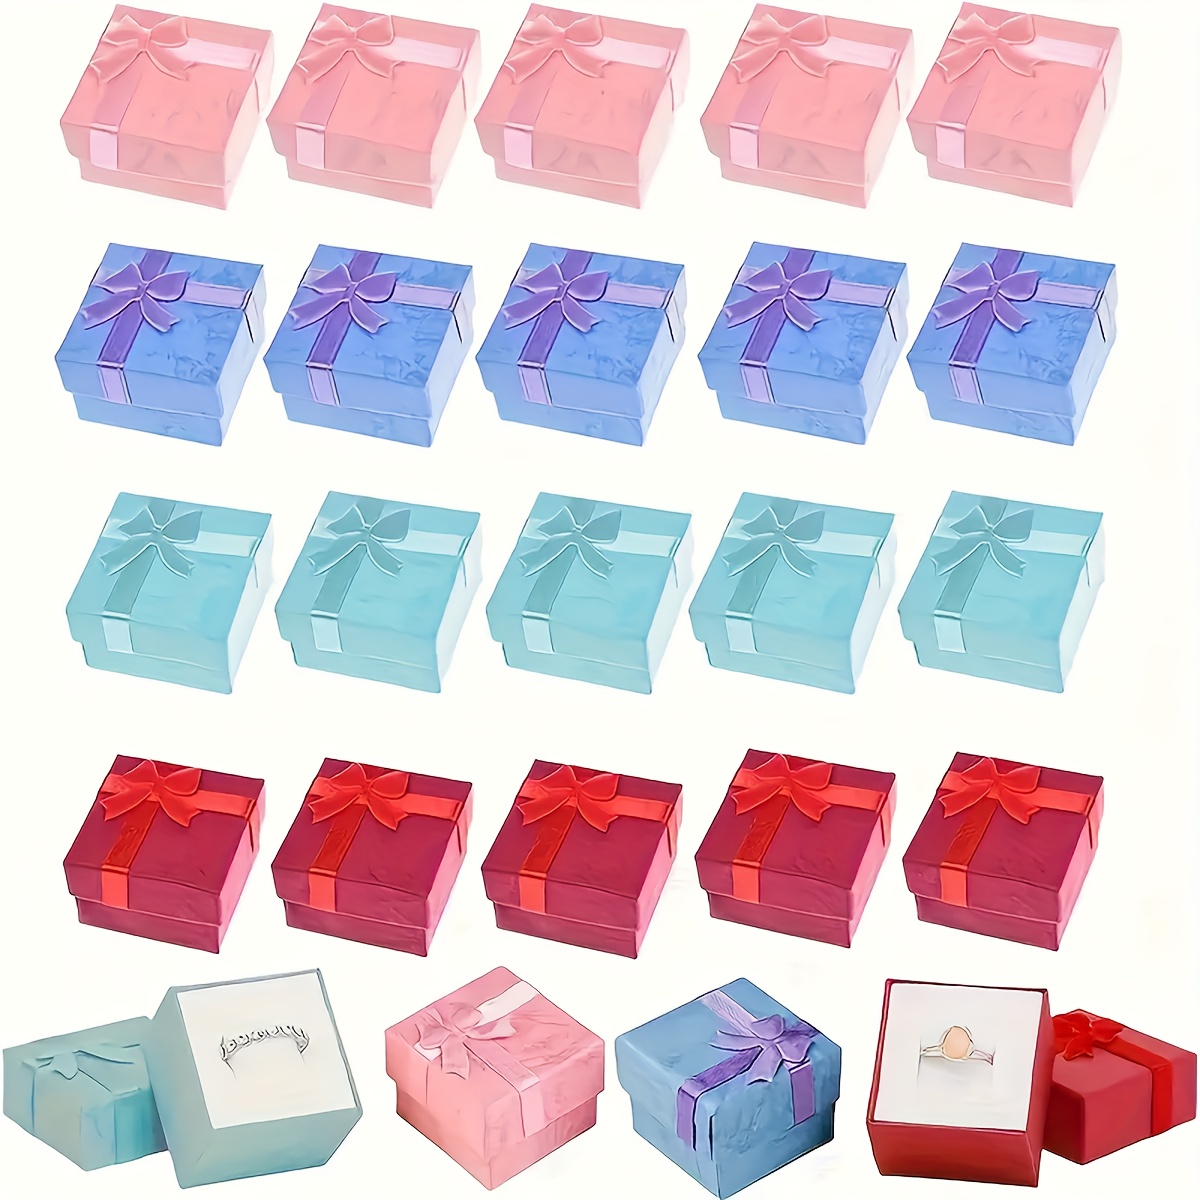 

24pcs Classic Ring Packaging Boxes With Assorted Colors